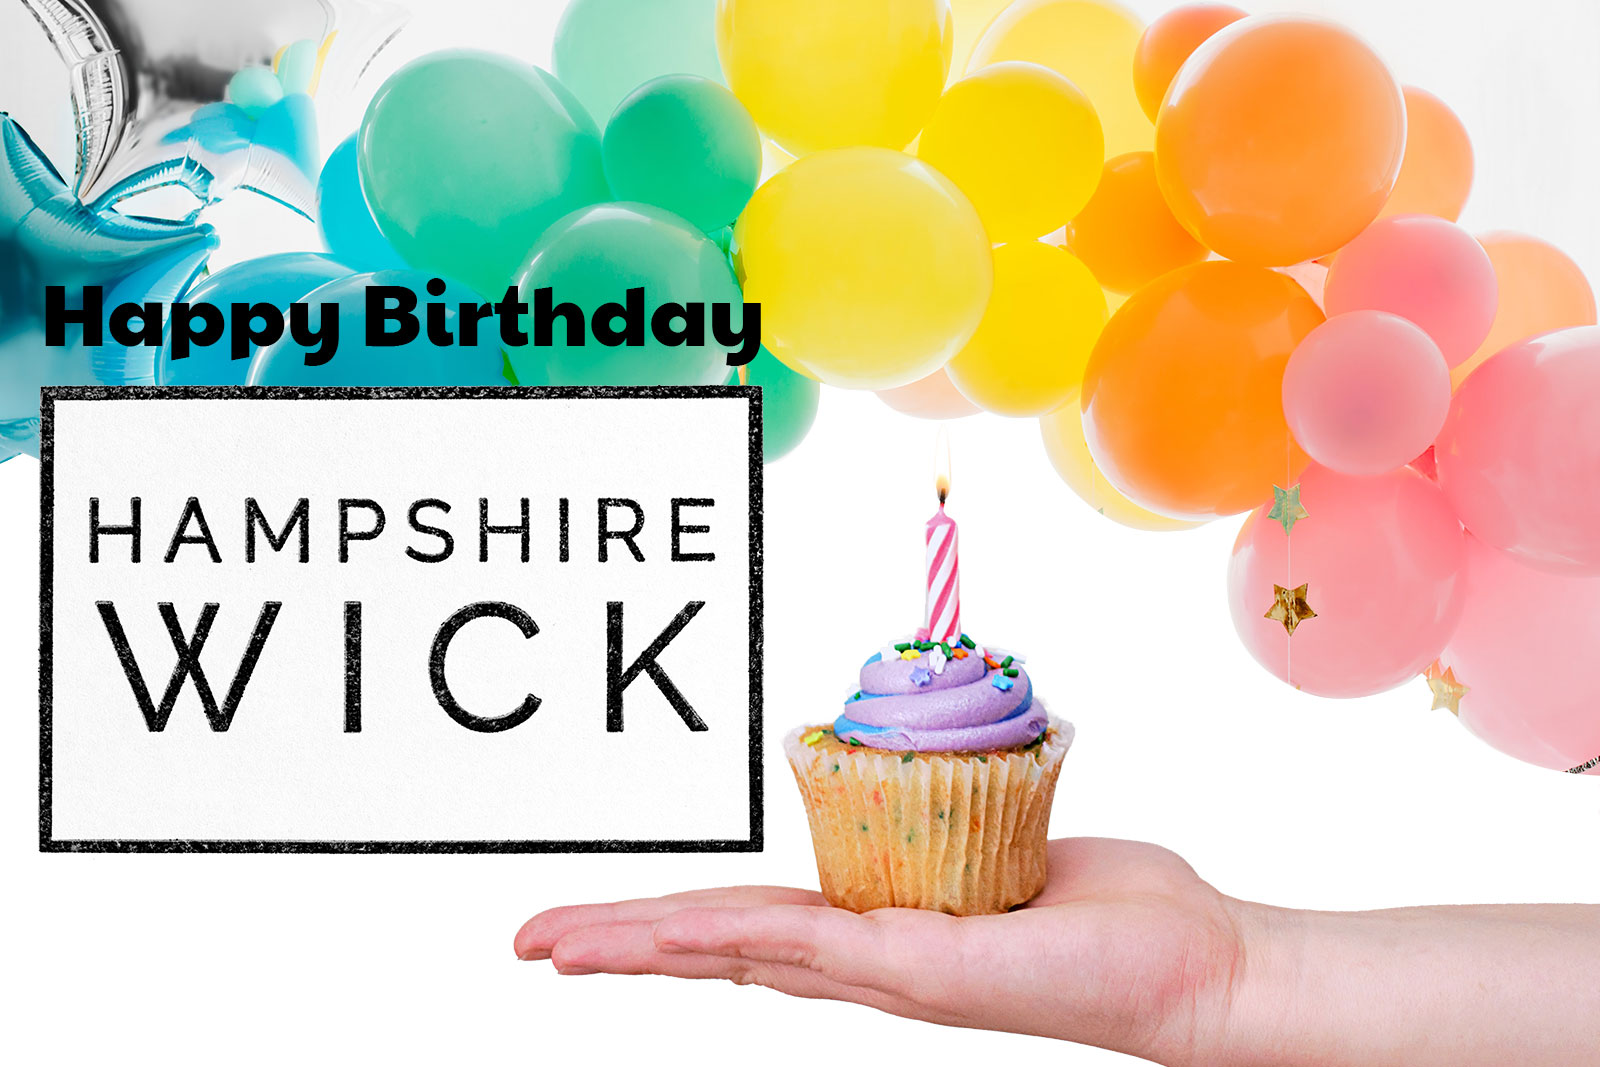 balloons and cake celebrating hampshire wick's first birthday